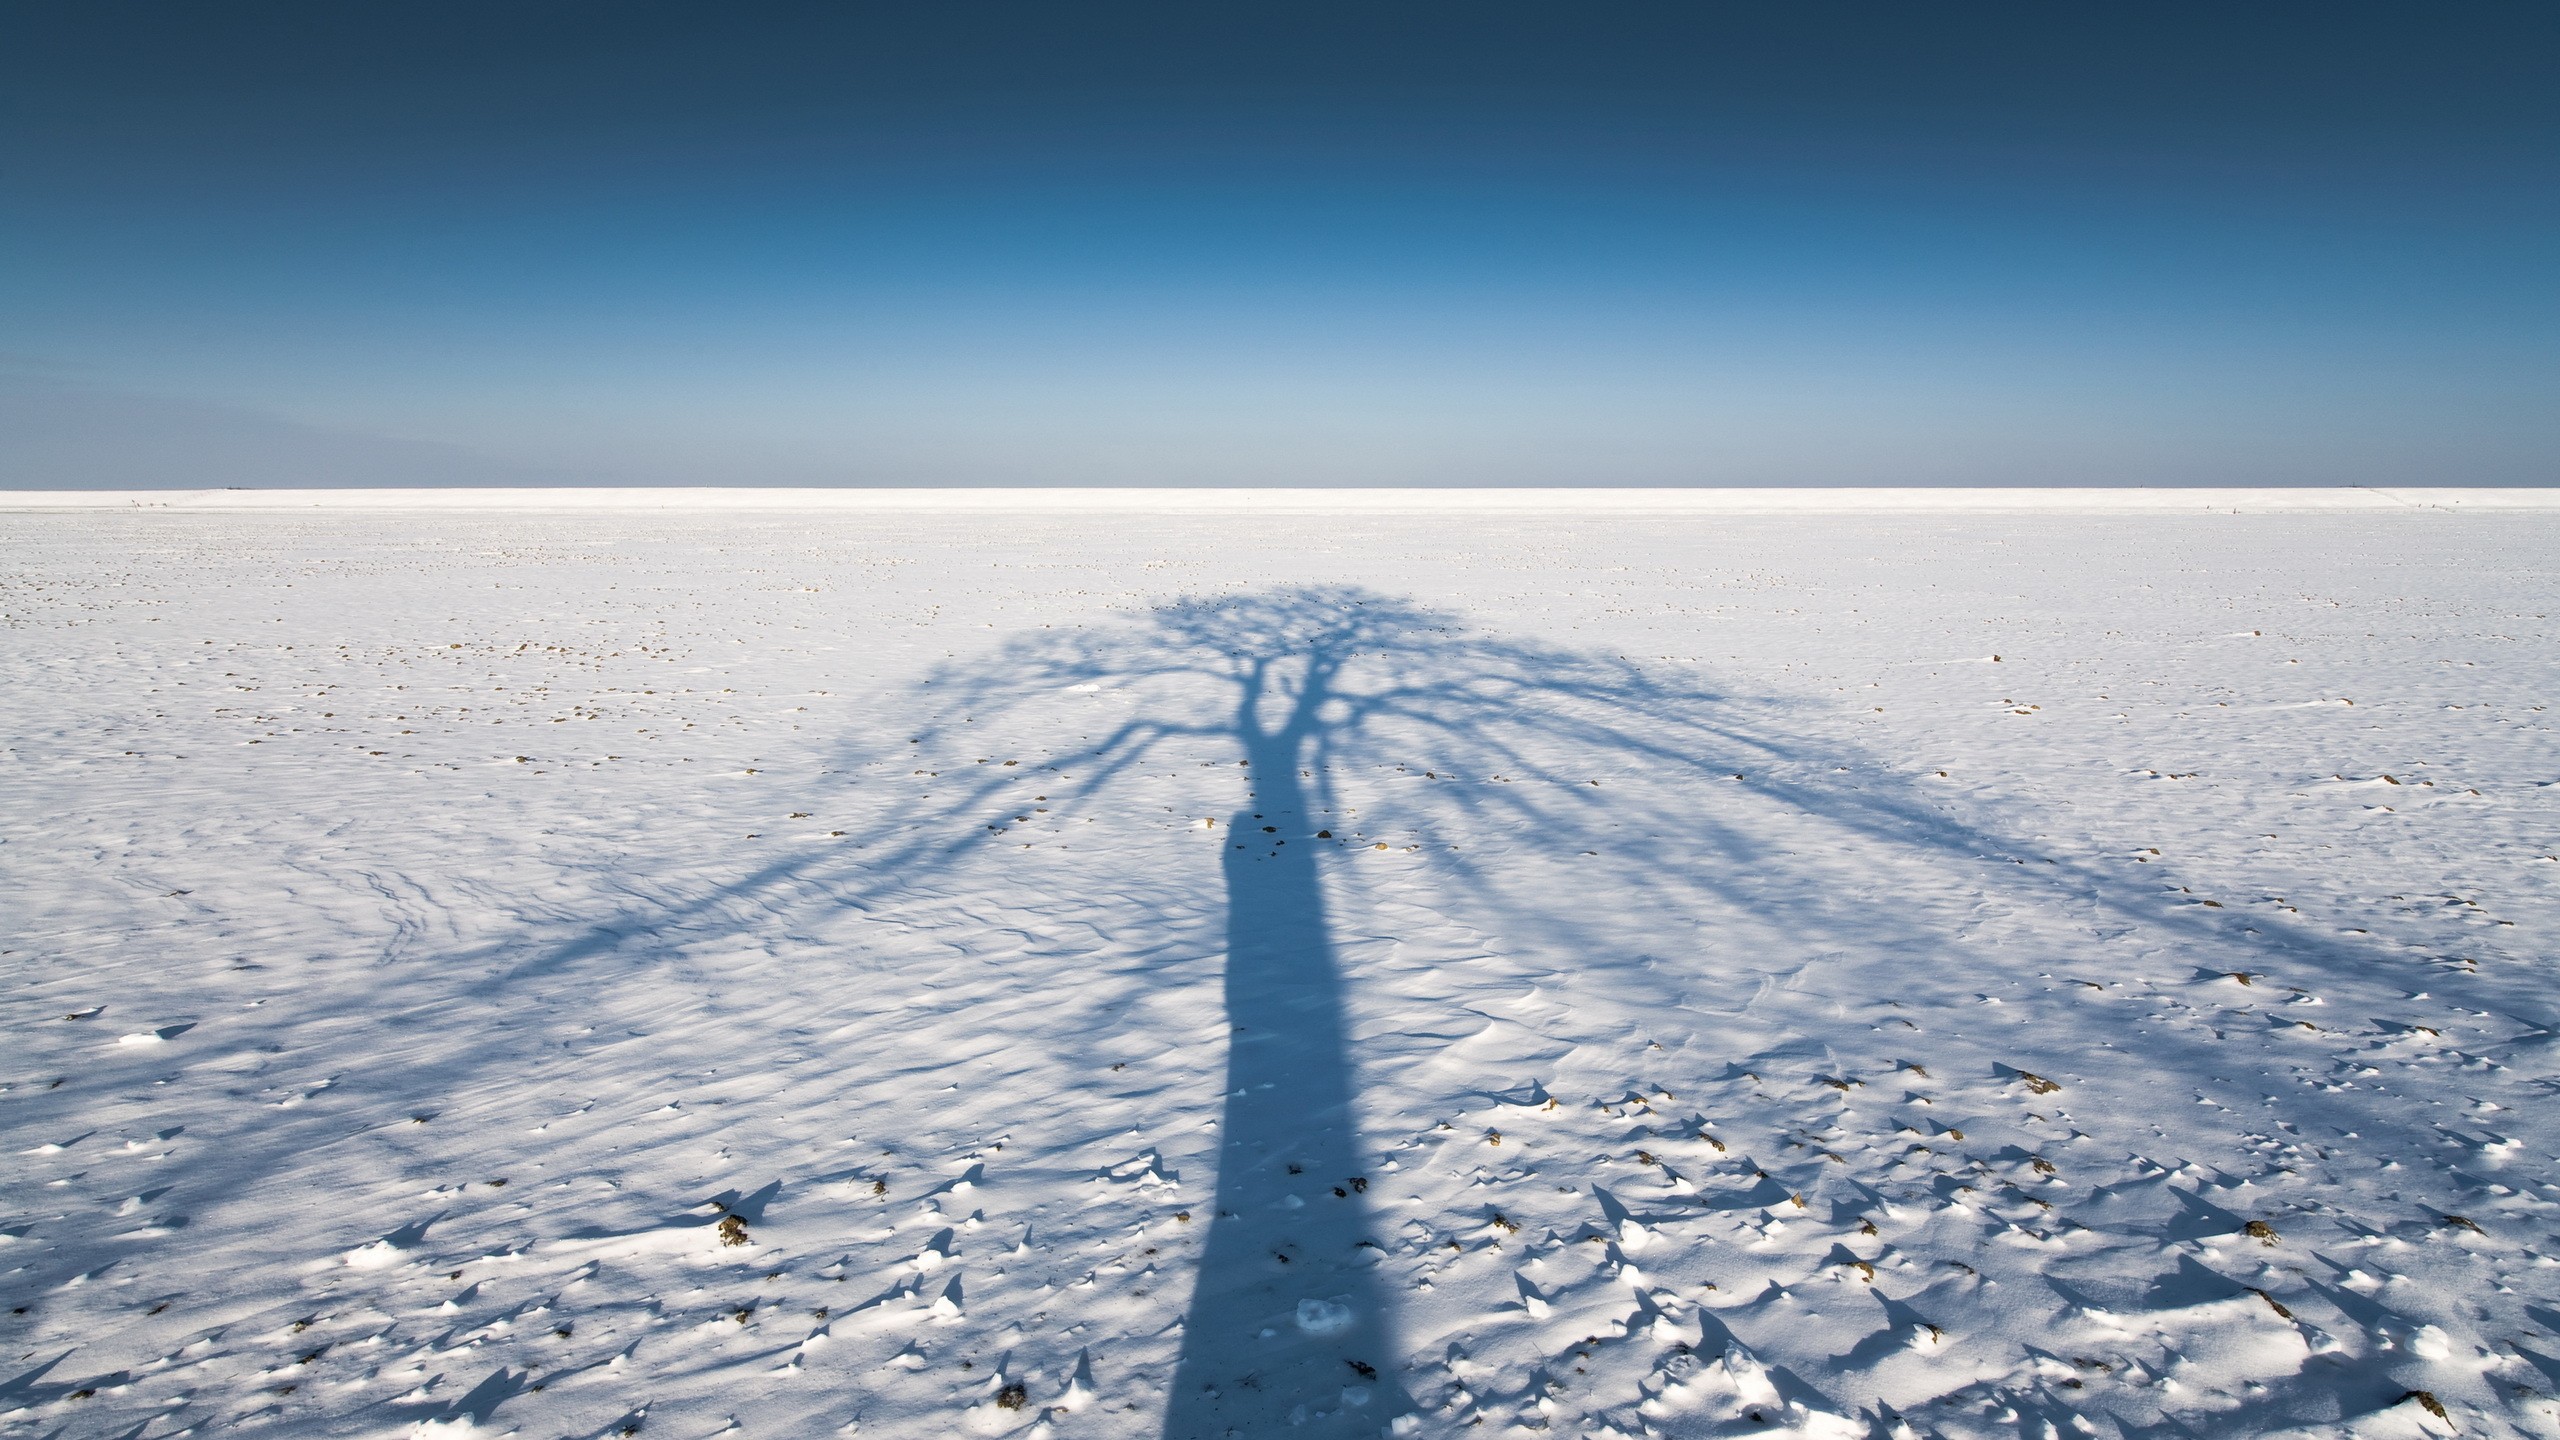 General 2560x1440 shadow snow winter landscape nature cold outdoors sky horizon